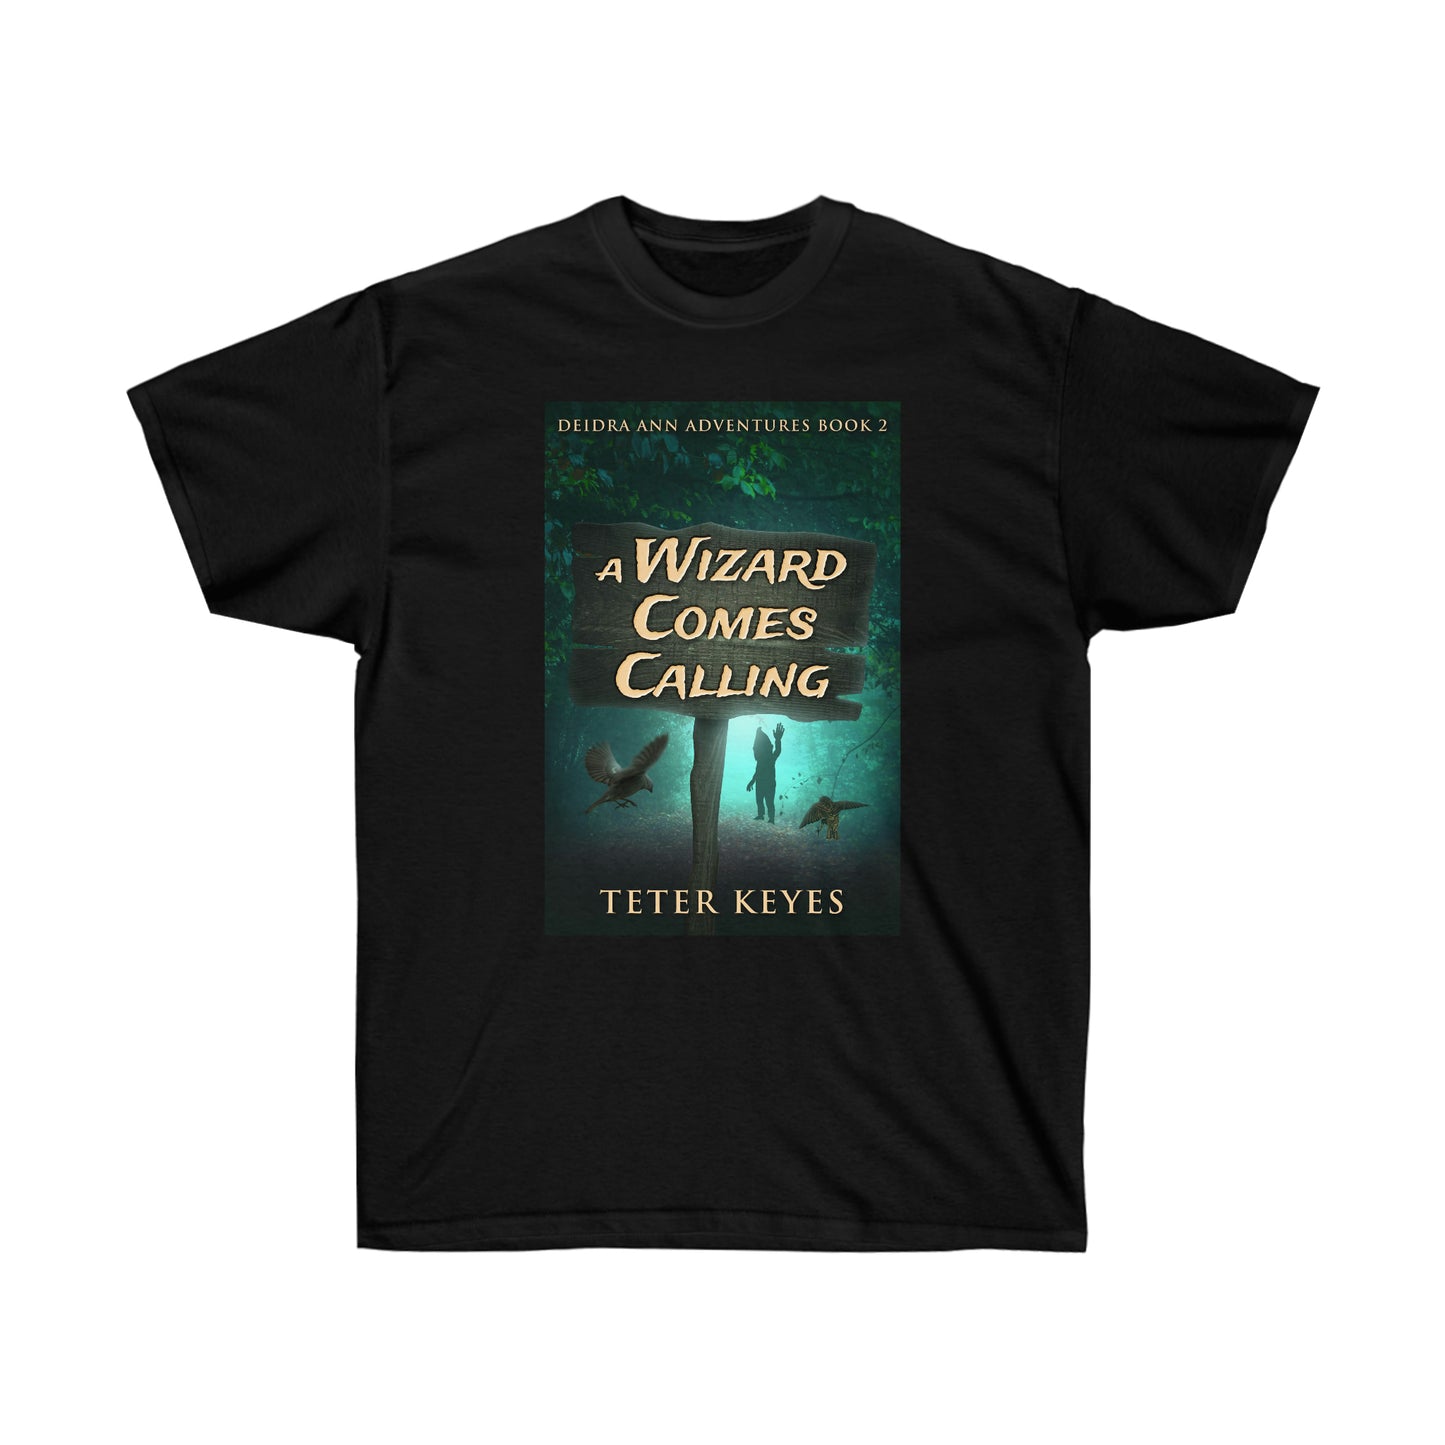 A Wizard Comes Calling - Unisex T-Shirt